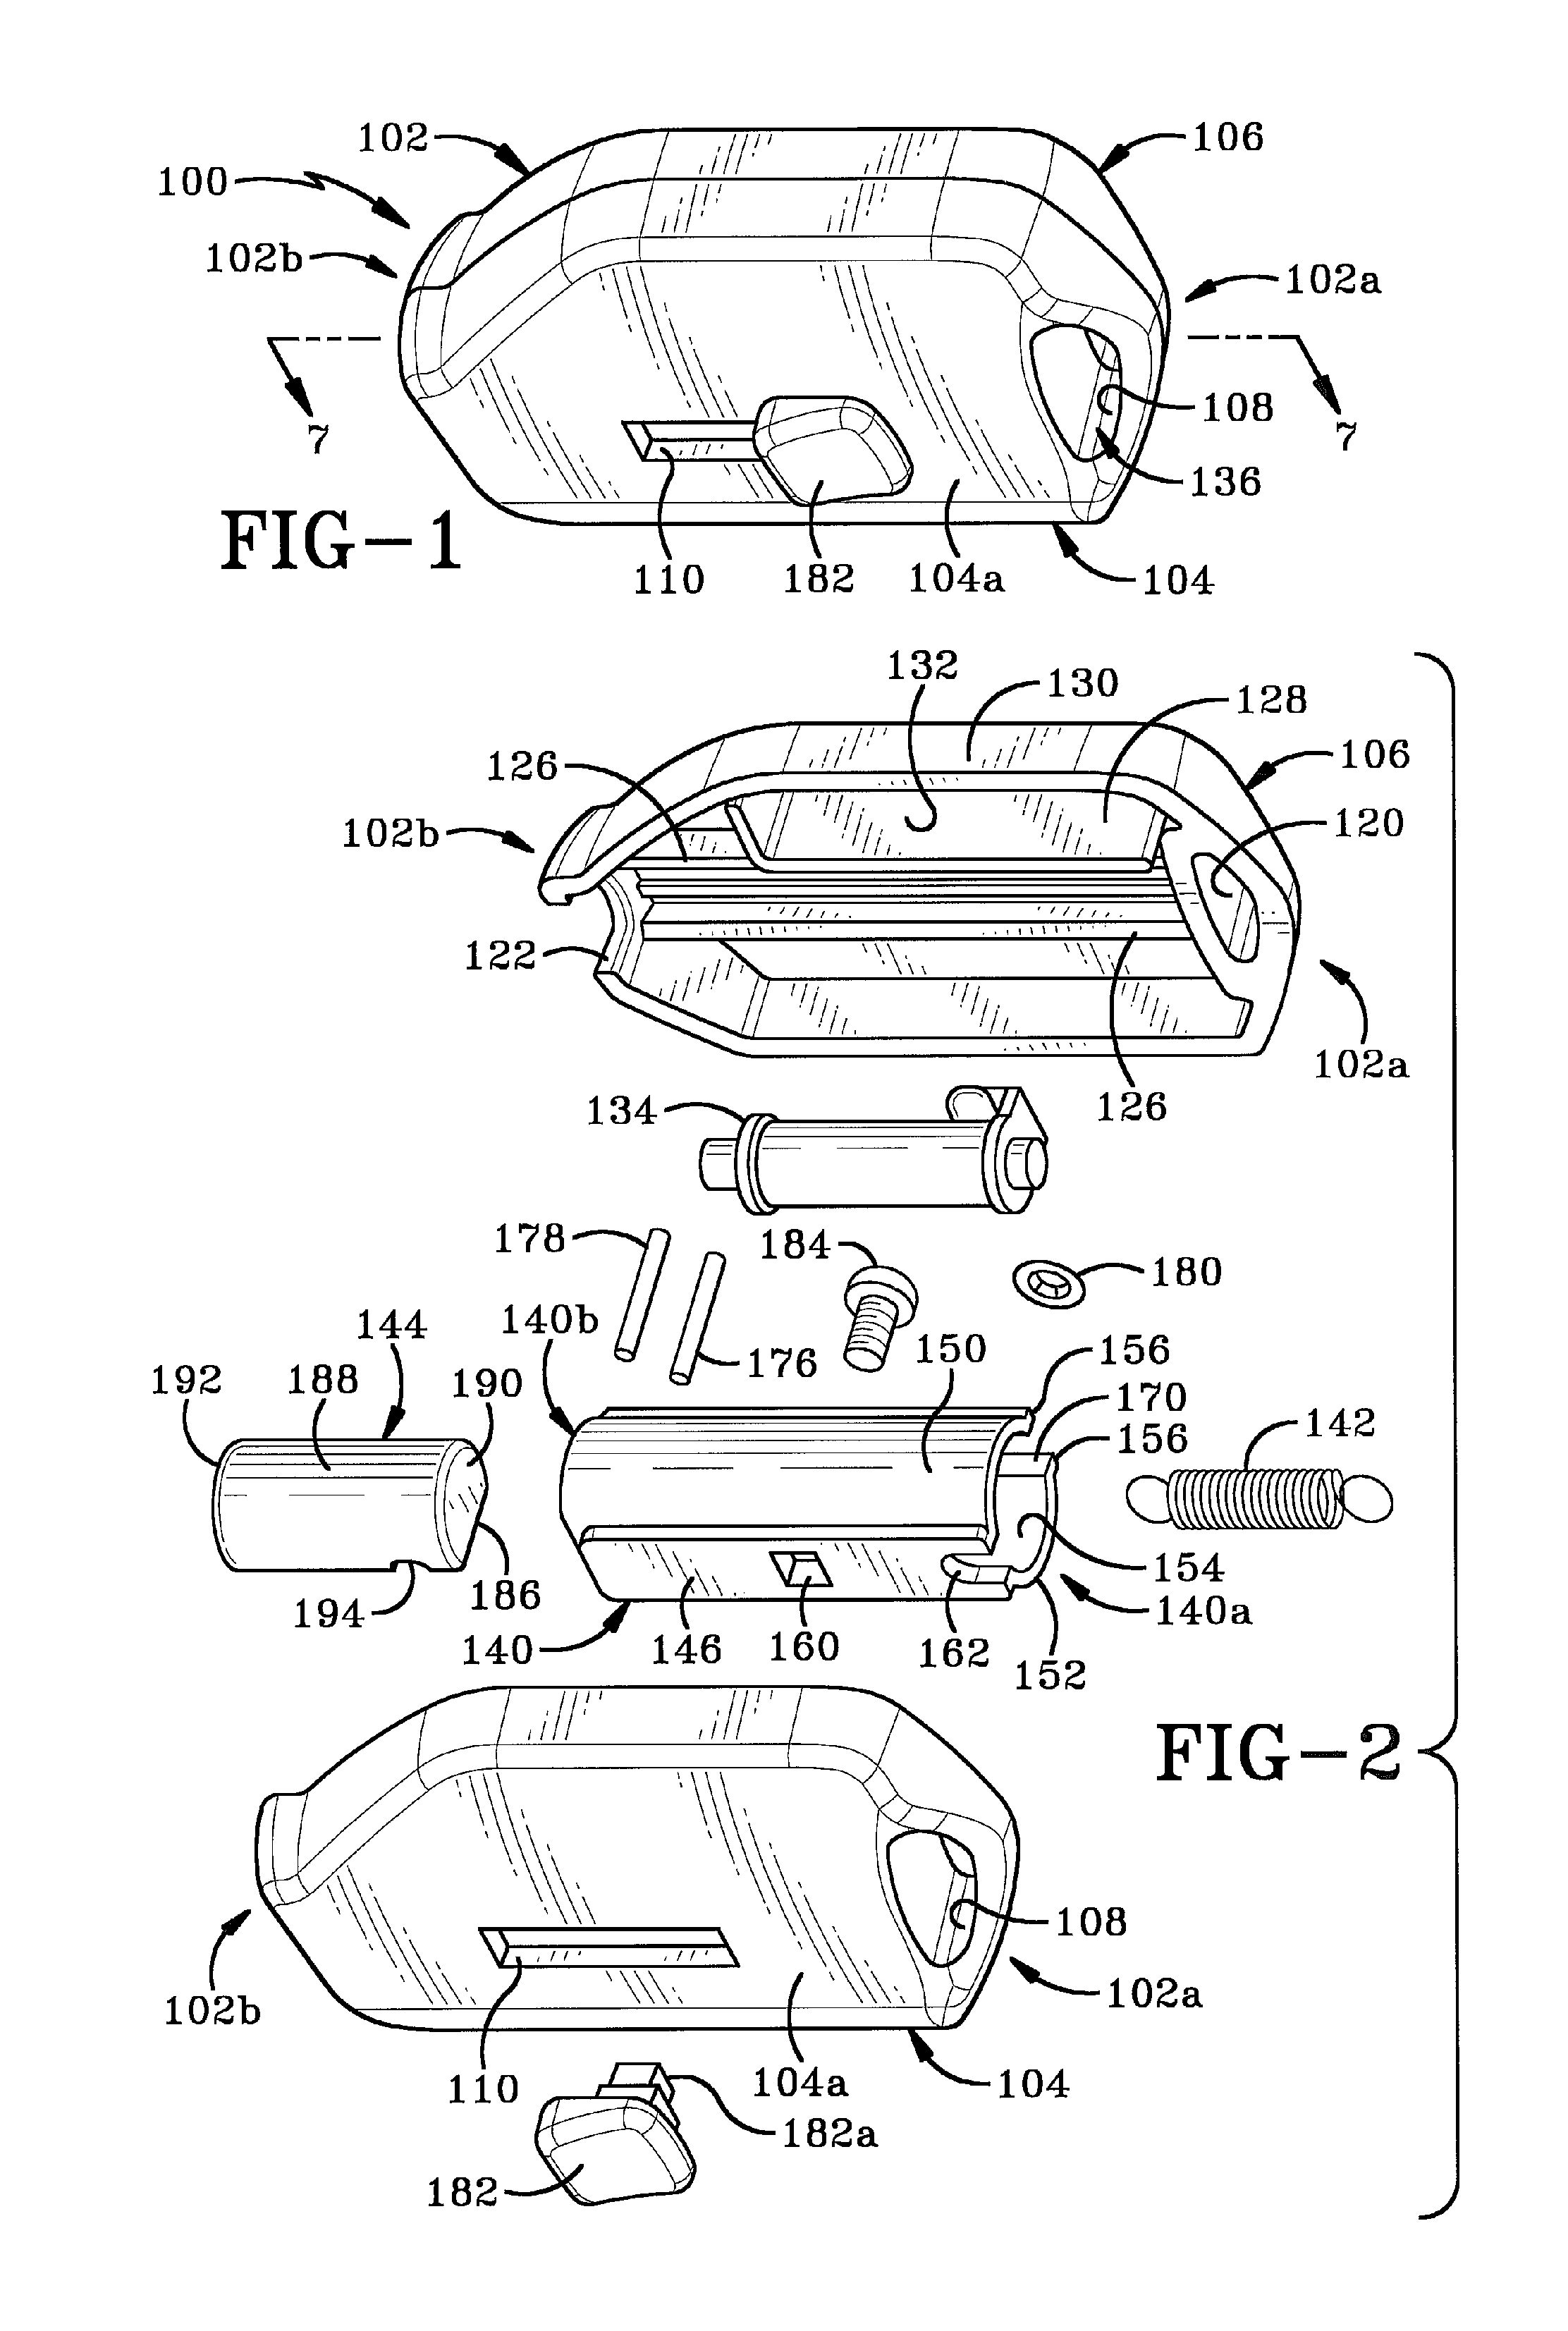 Magnetic key for use with a security device